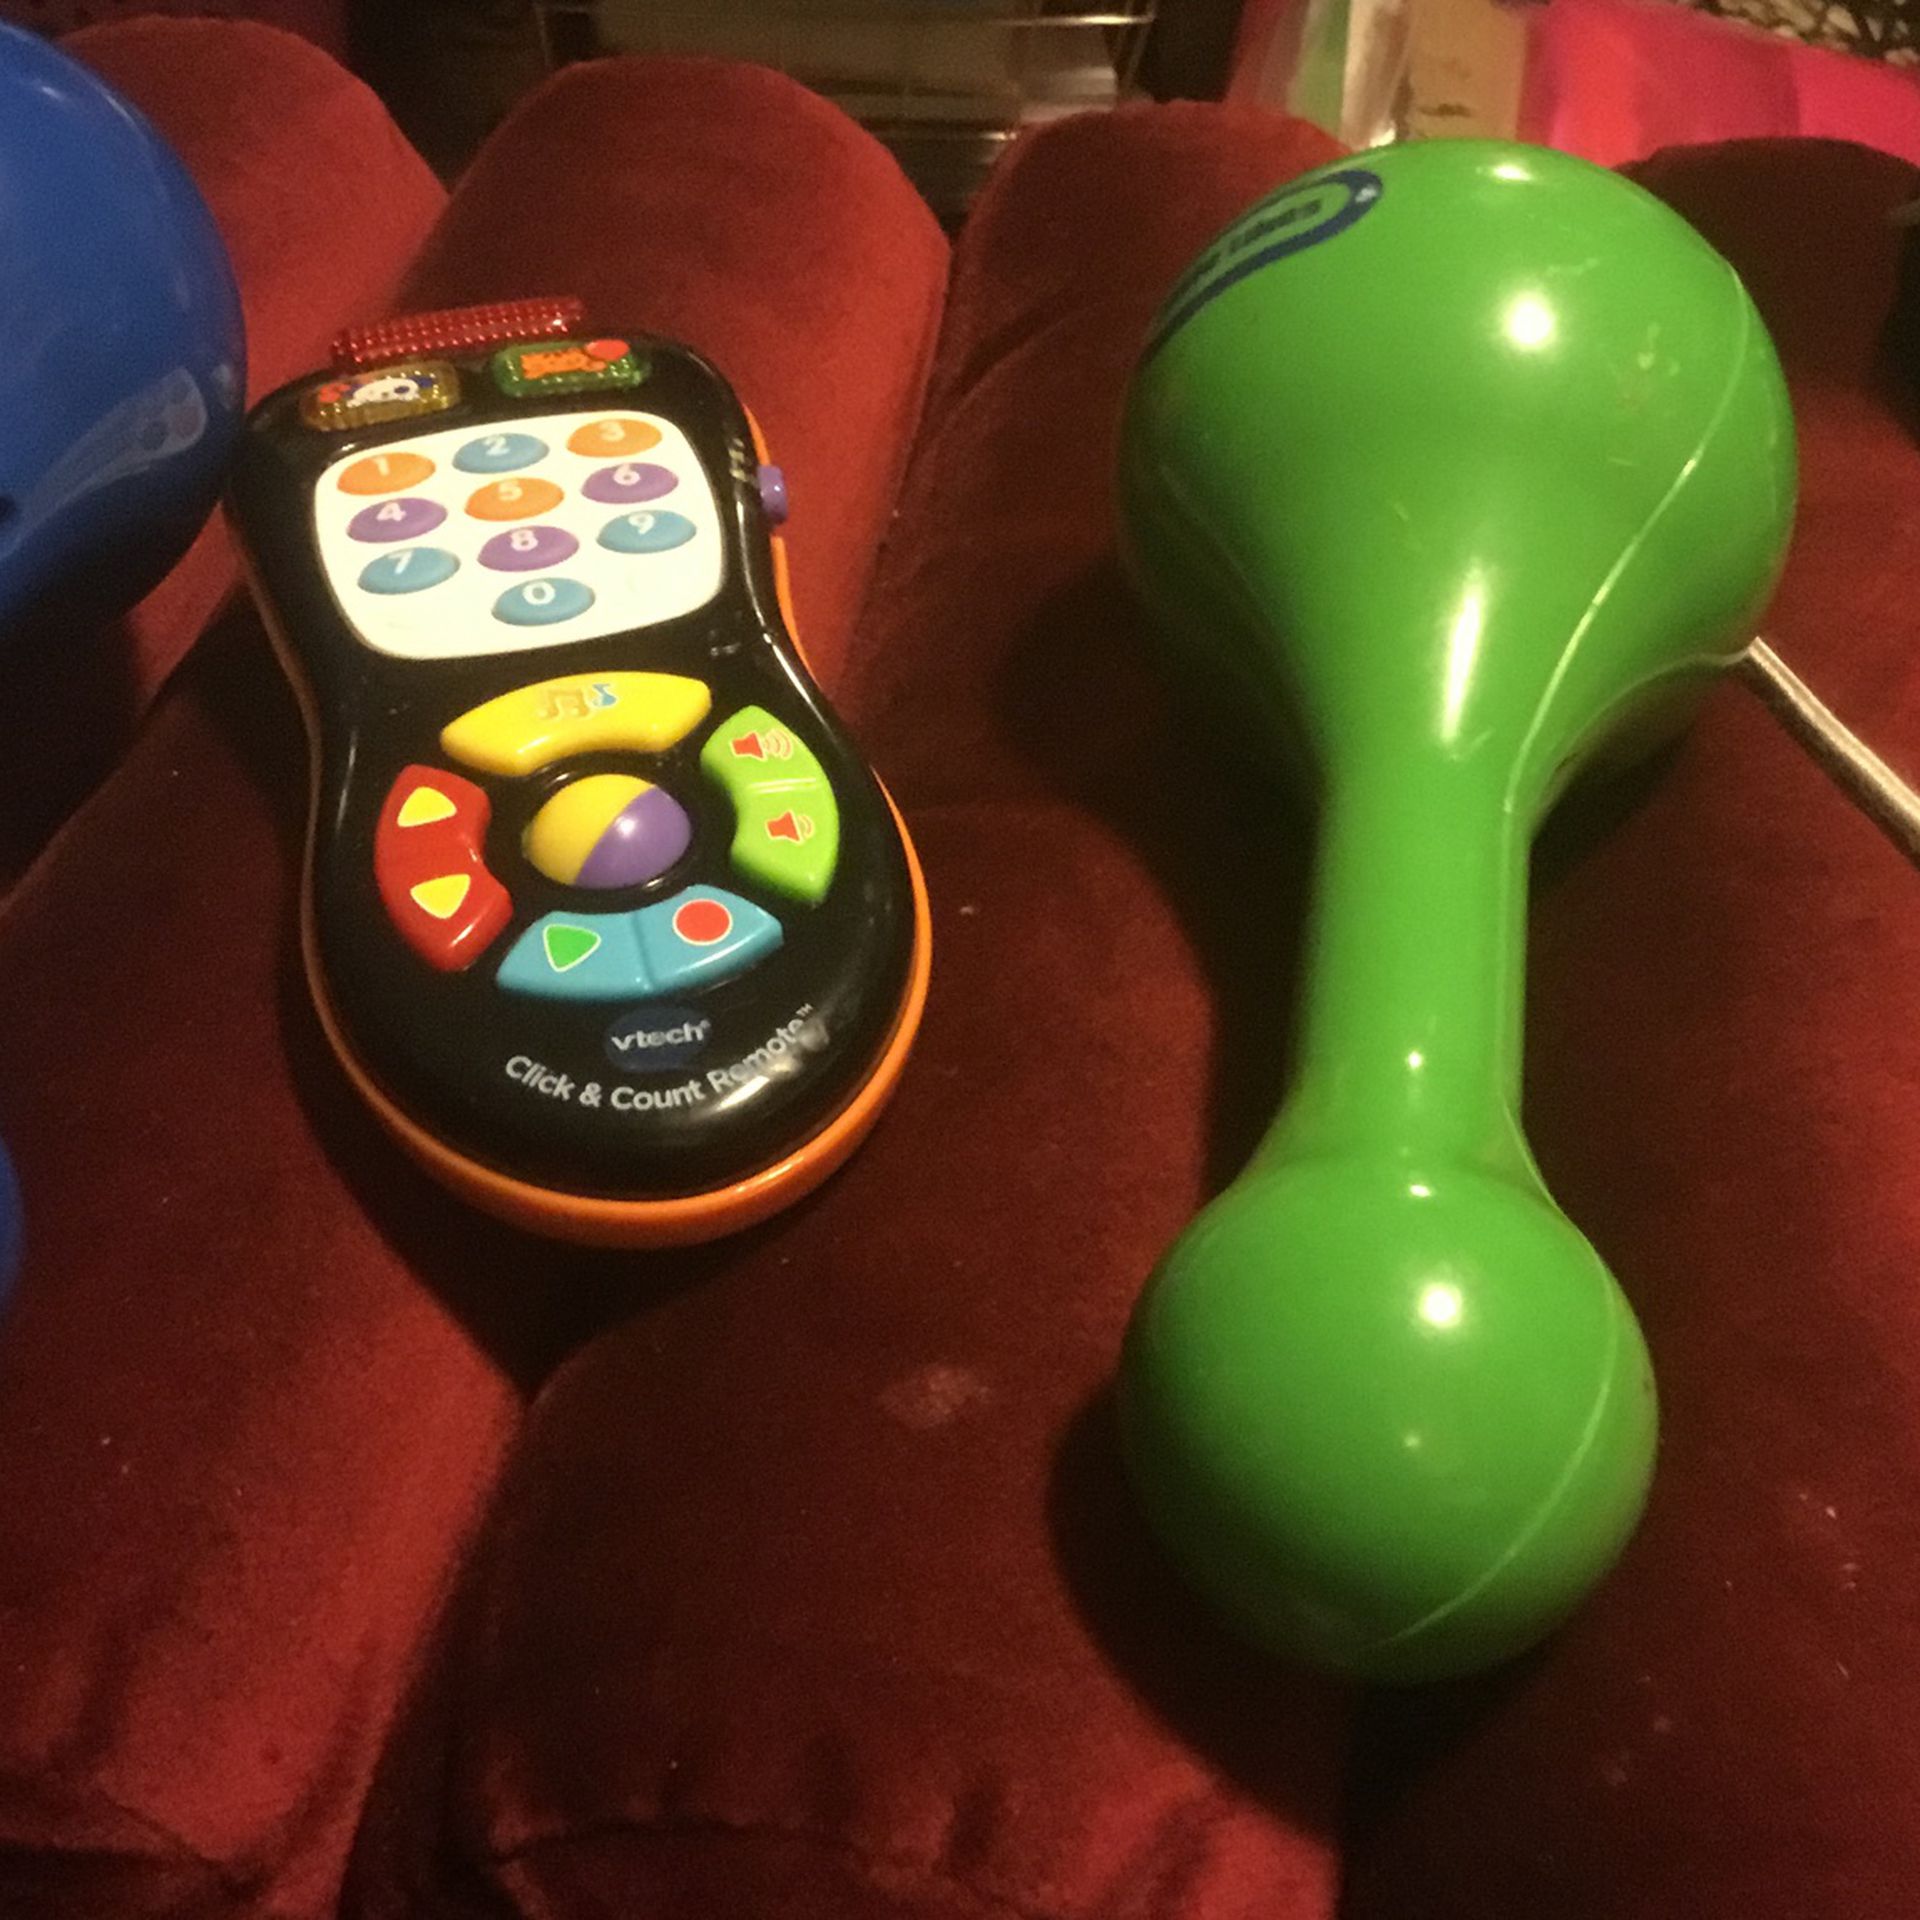 Two Miscal Shaker One Little Te phone That Make Music On Sale For 5.00  For Toddler To Have Fun One Blue One Green 